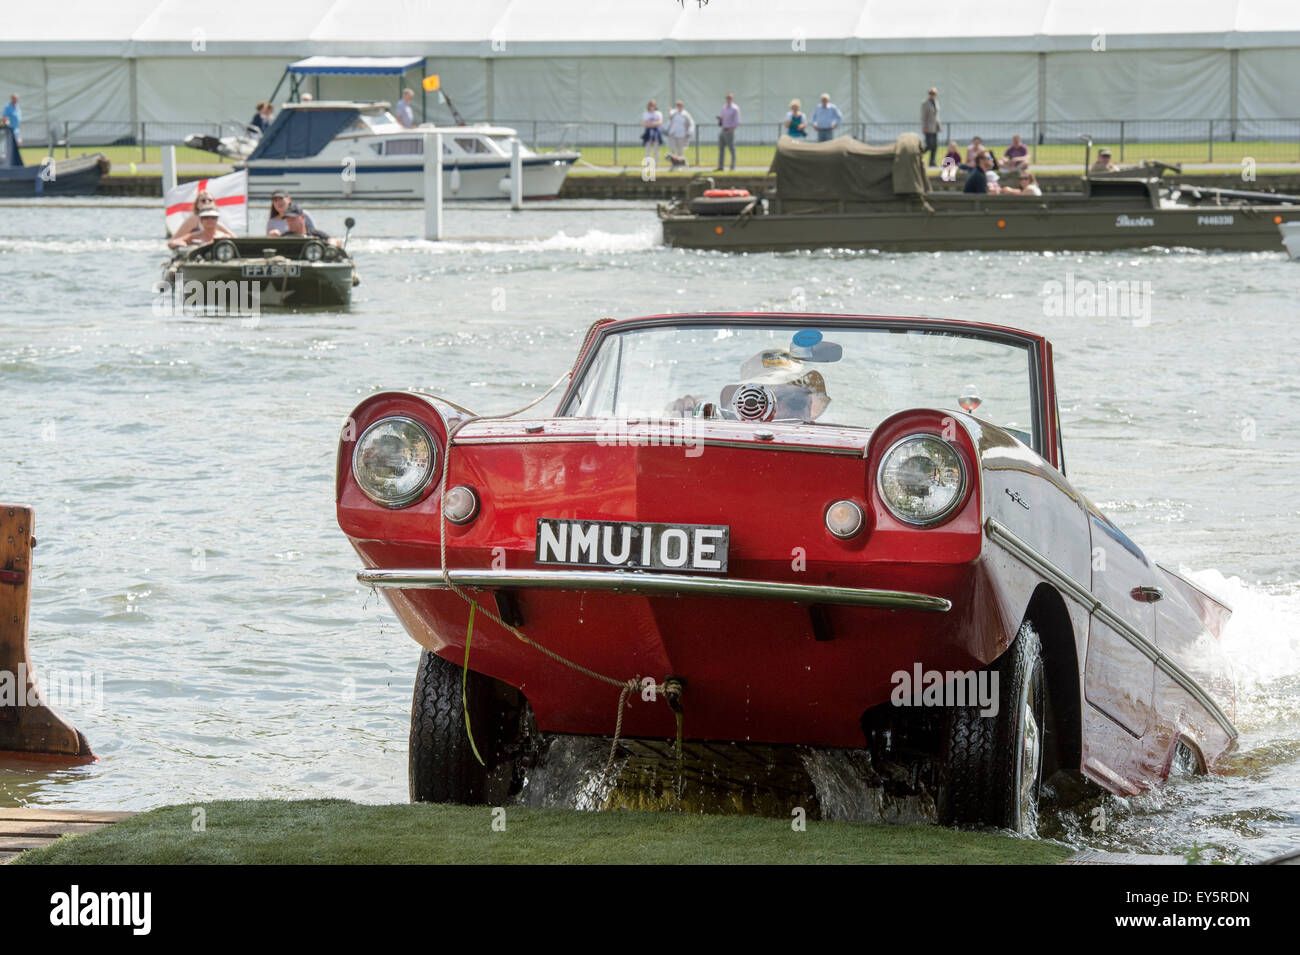 Amphicar driving out of the river at the Thames Traditional Boat Festival, Fawley Meadows, Henley On Thames, Oxfordshire, England Stock Photo